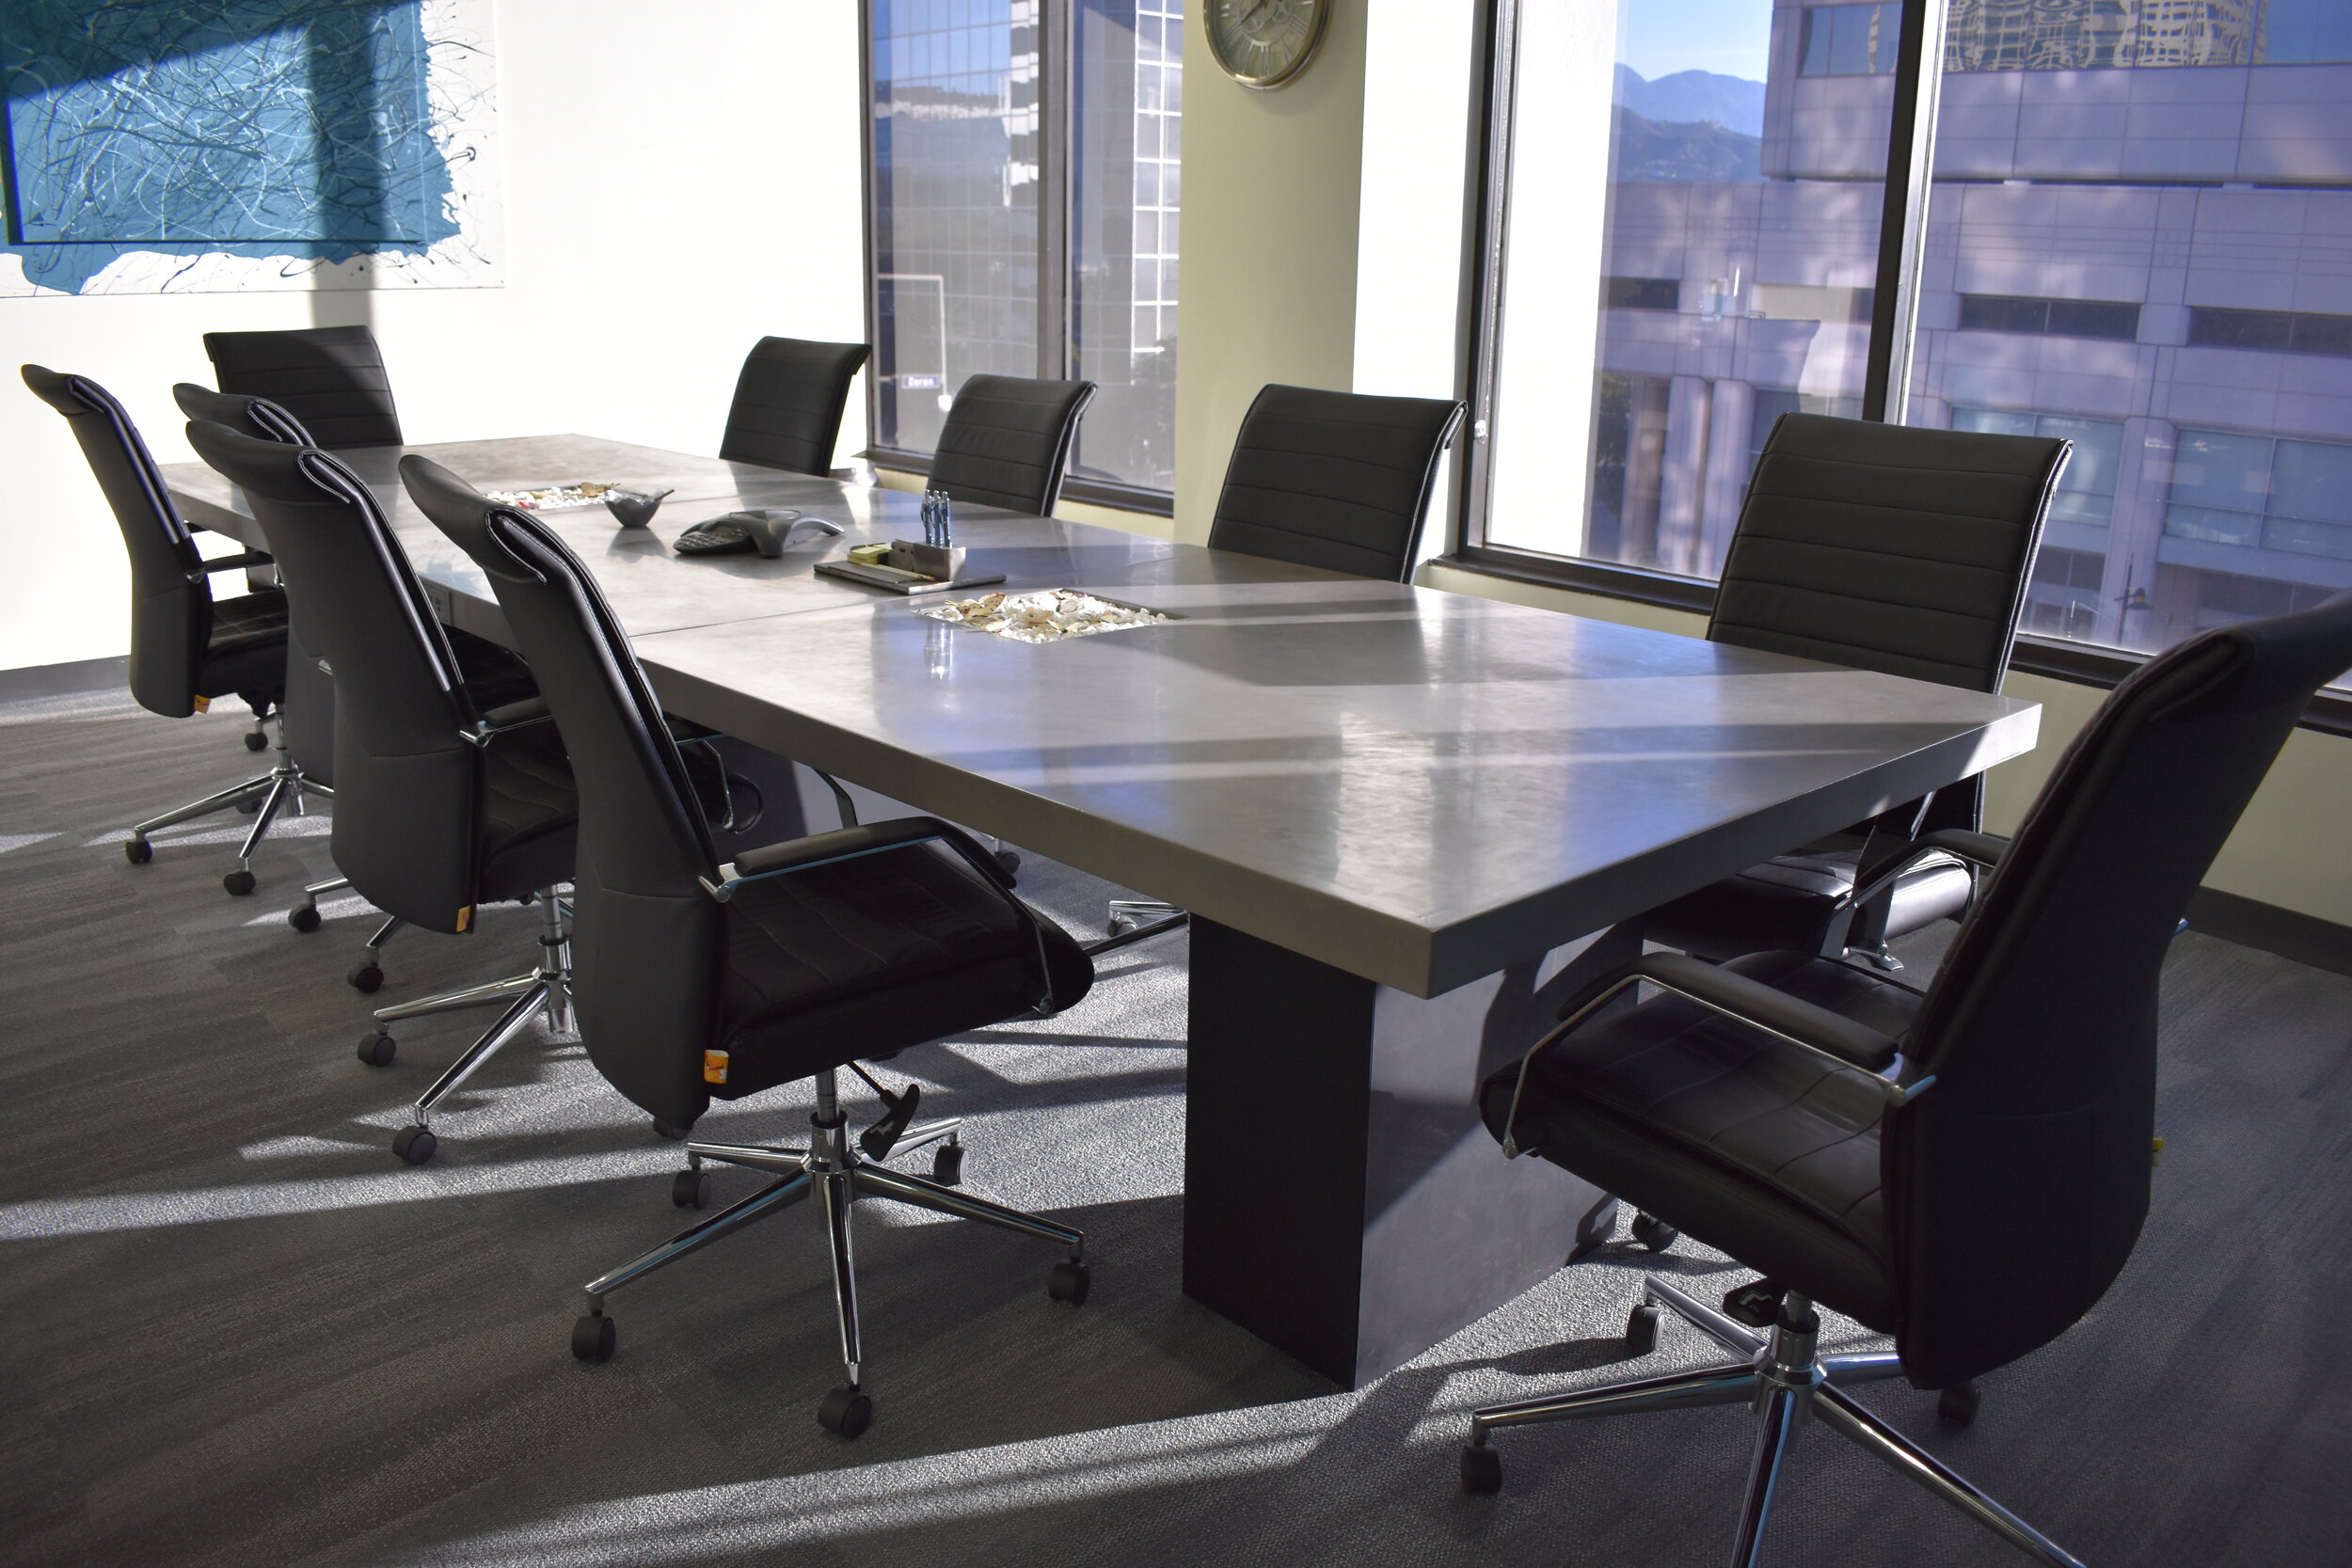  Conference Table- Epoxy concrete top with steel industrial base.  